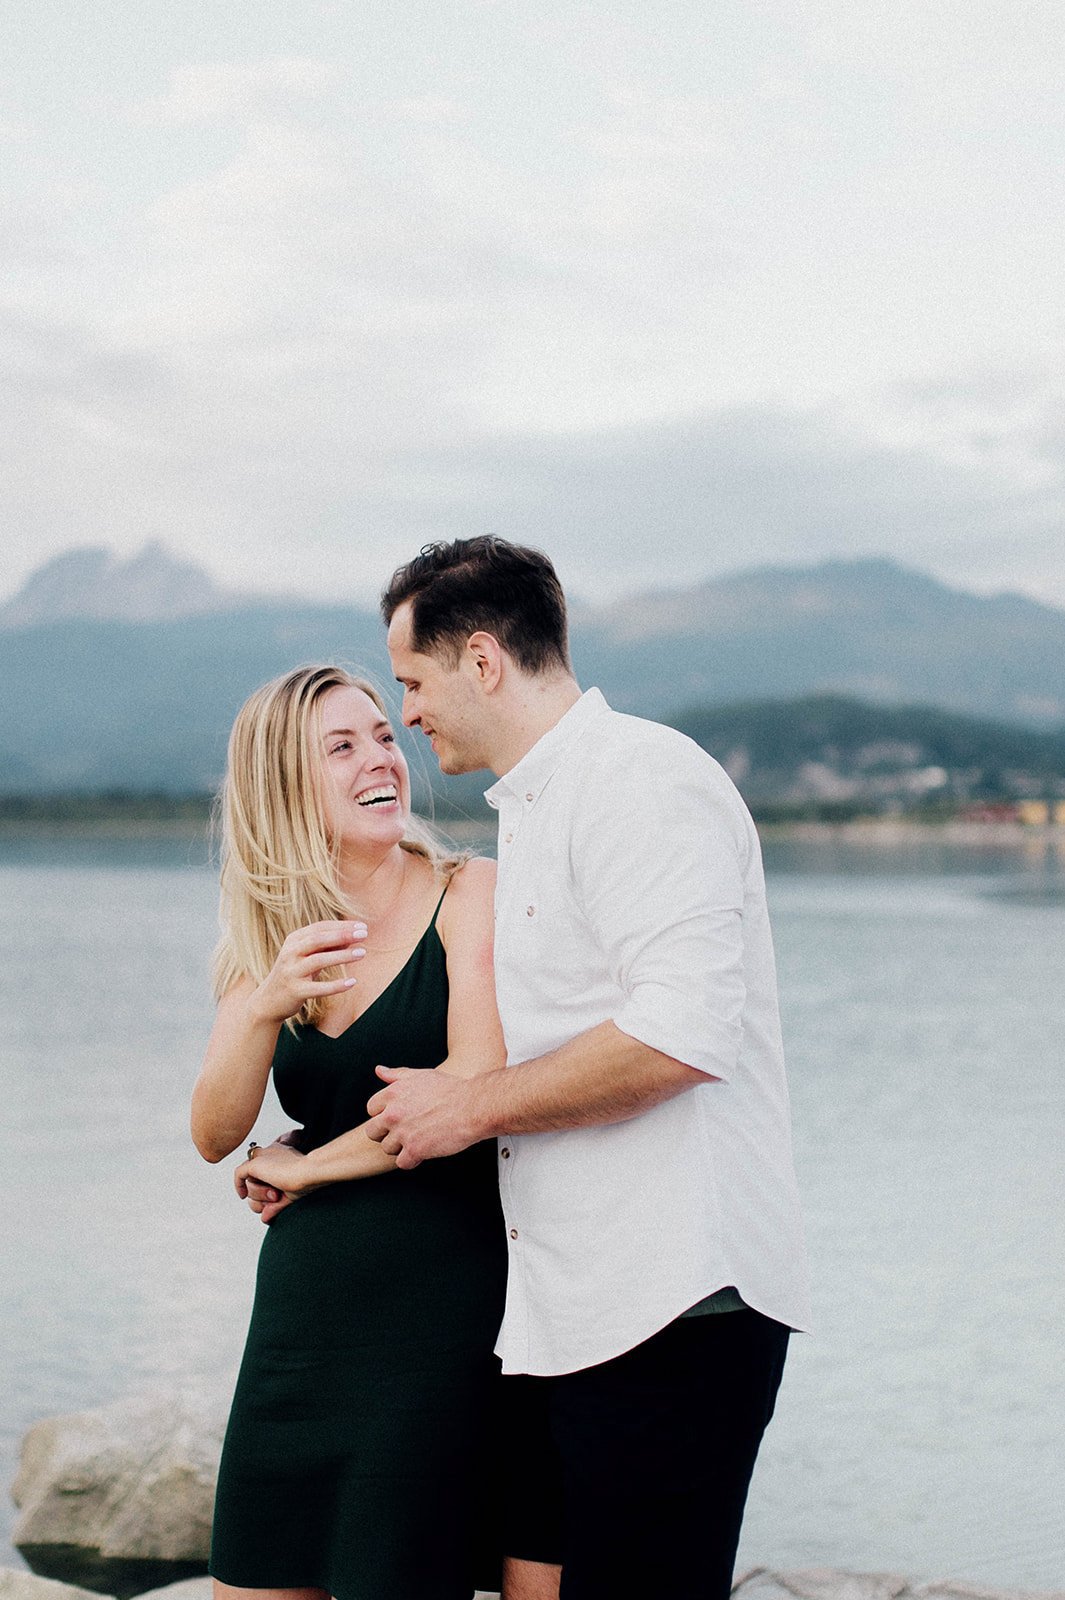 A man and woman chuckle as they hug in front of a scenic lake surrounded by mountains in Squamish, BC   